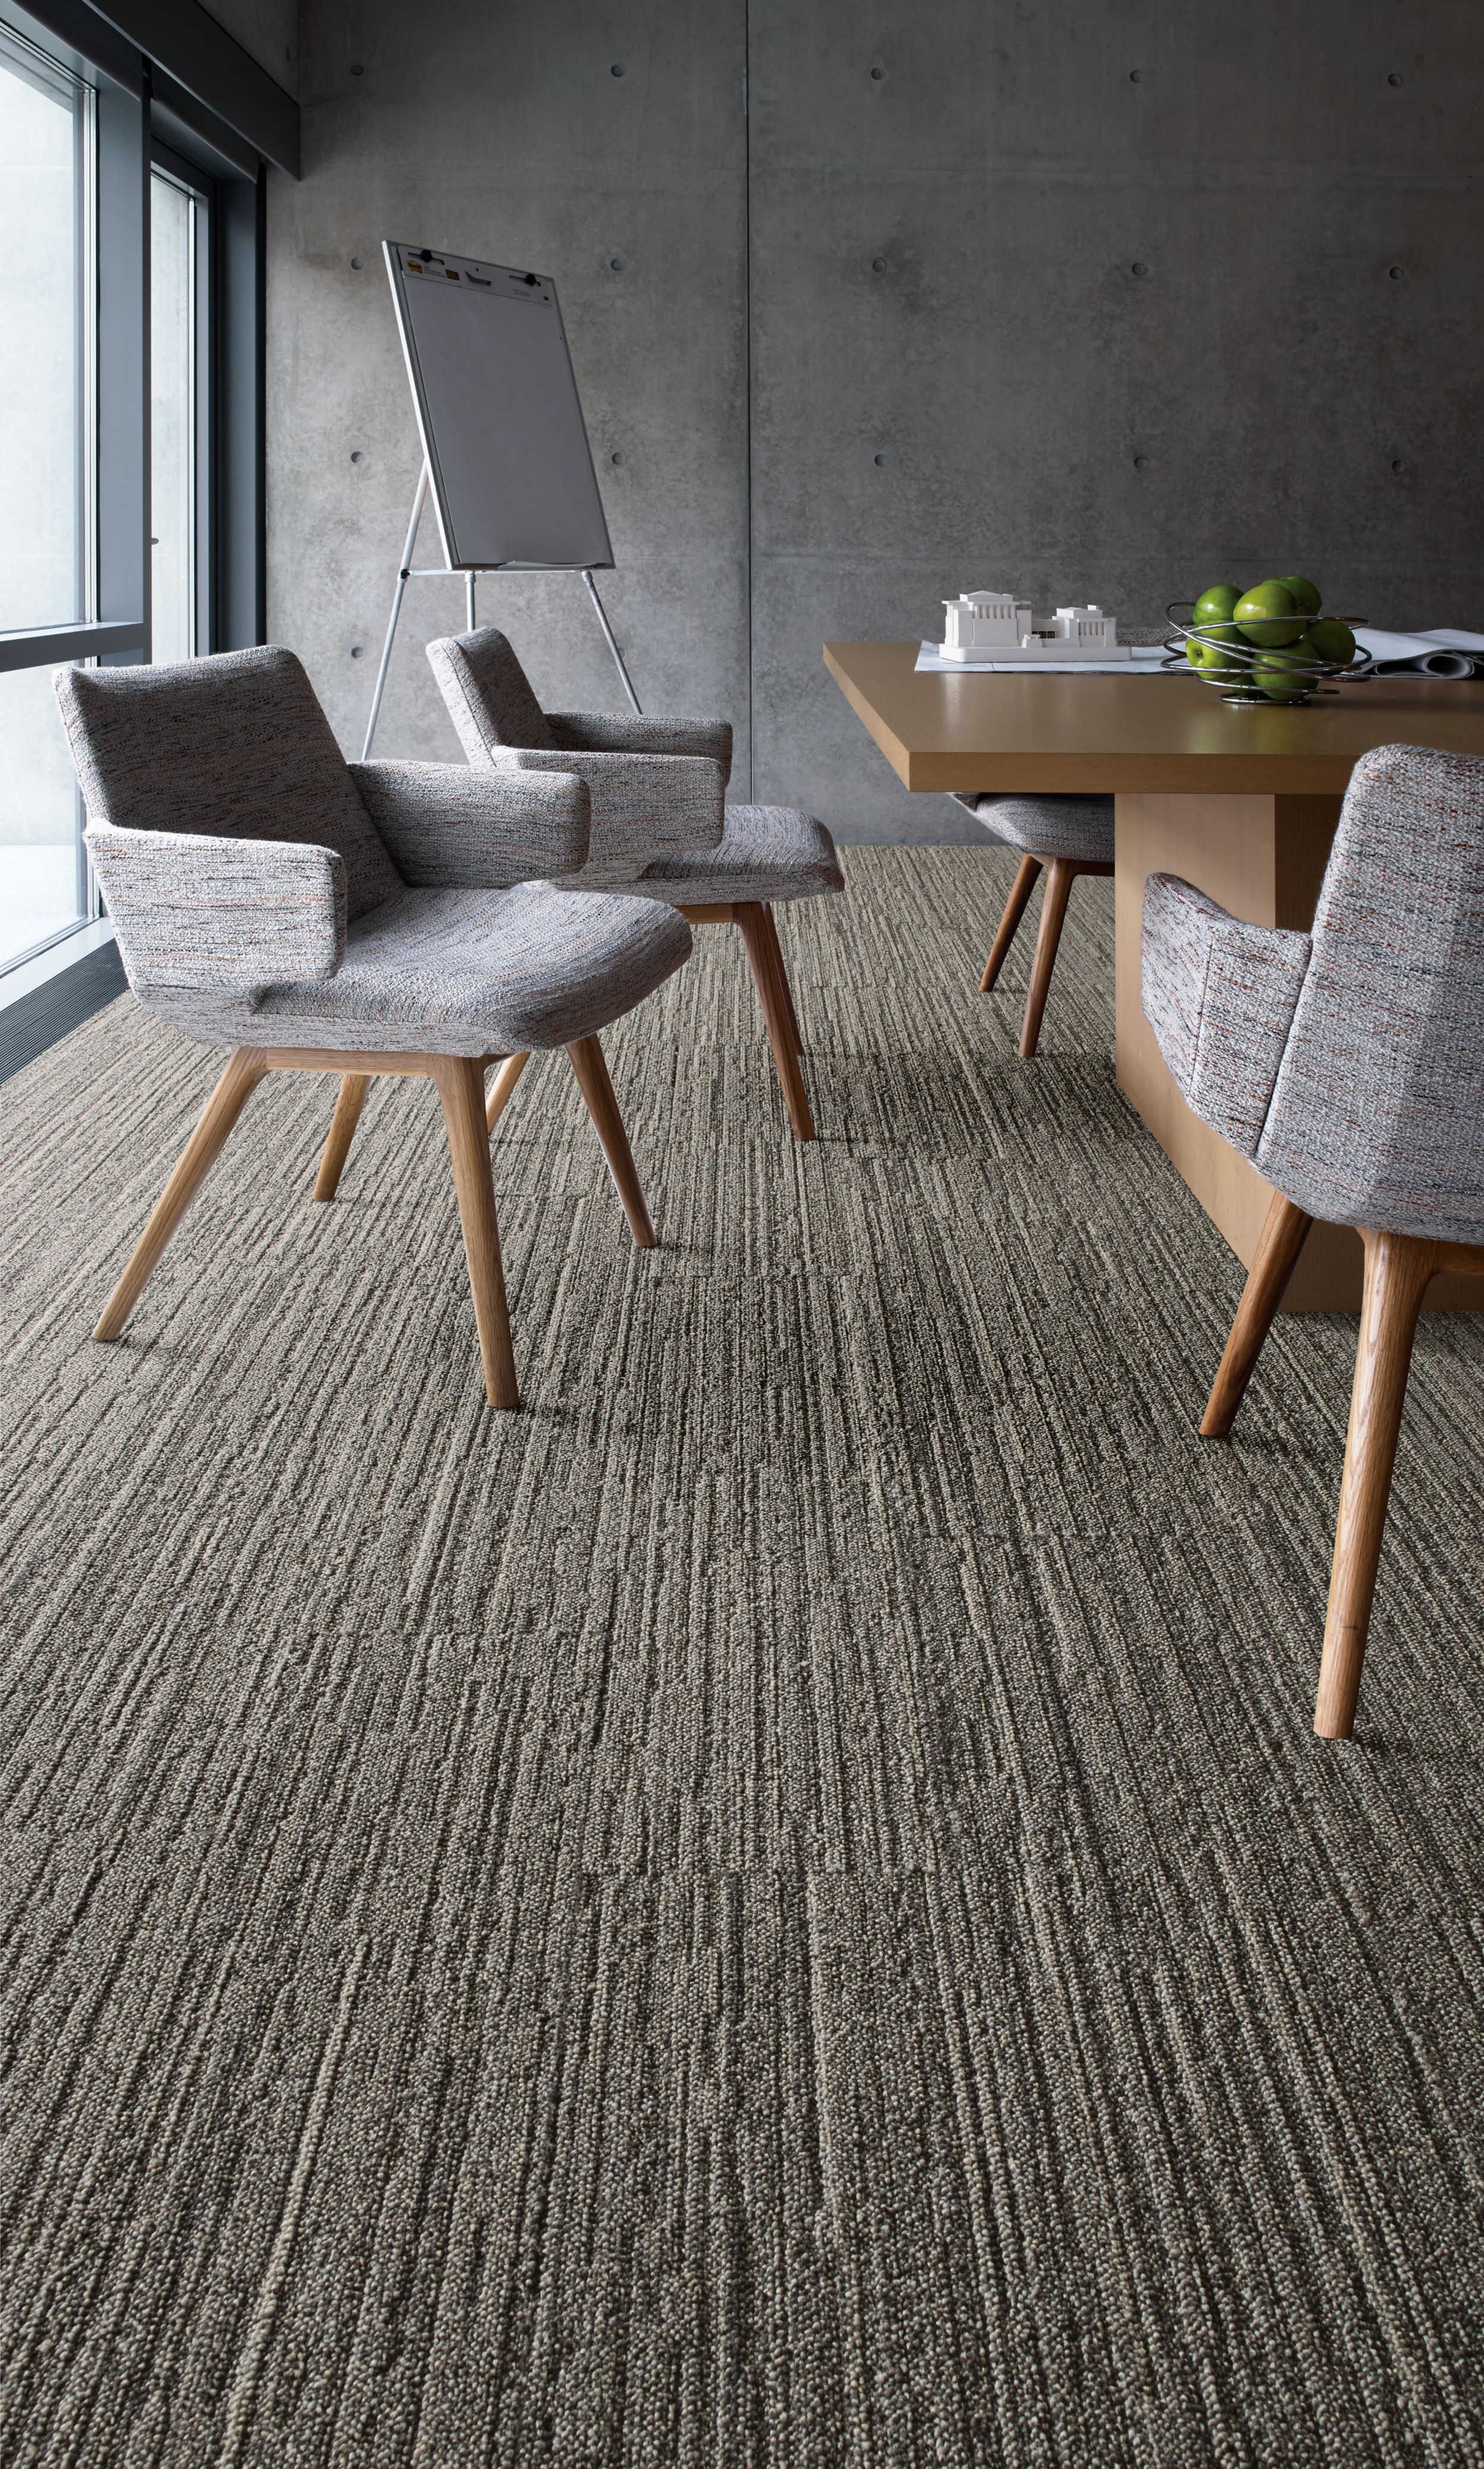 Interface WW880 plank carpet tile in meeting room with table and chairs Bildnummer 1